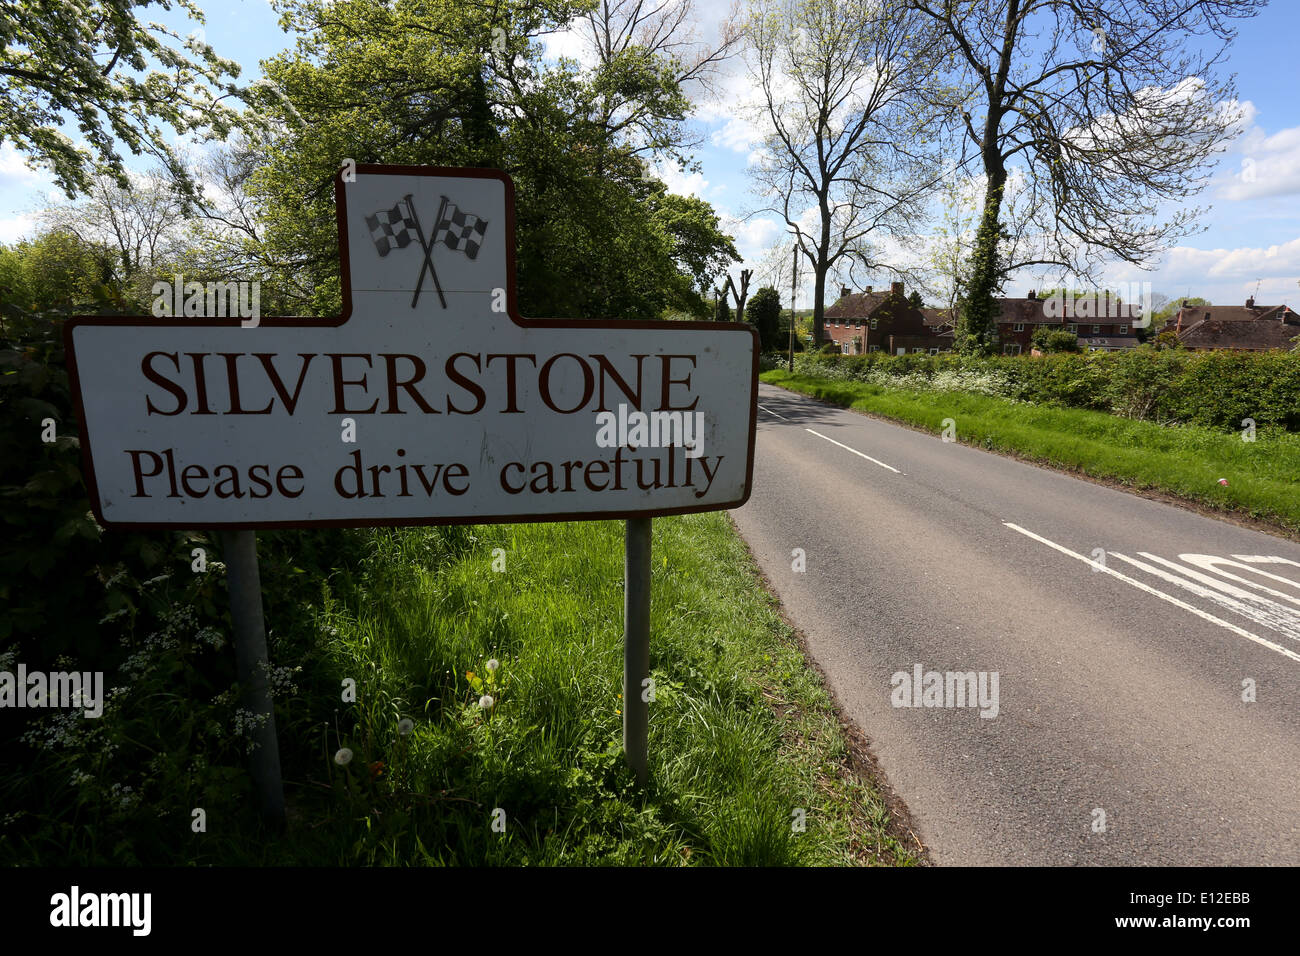 Silverstone 'please drive carefully' sign Stock Photo